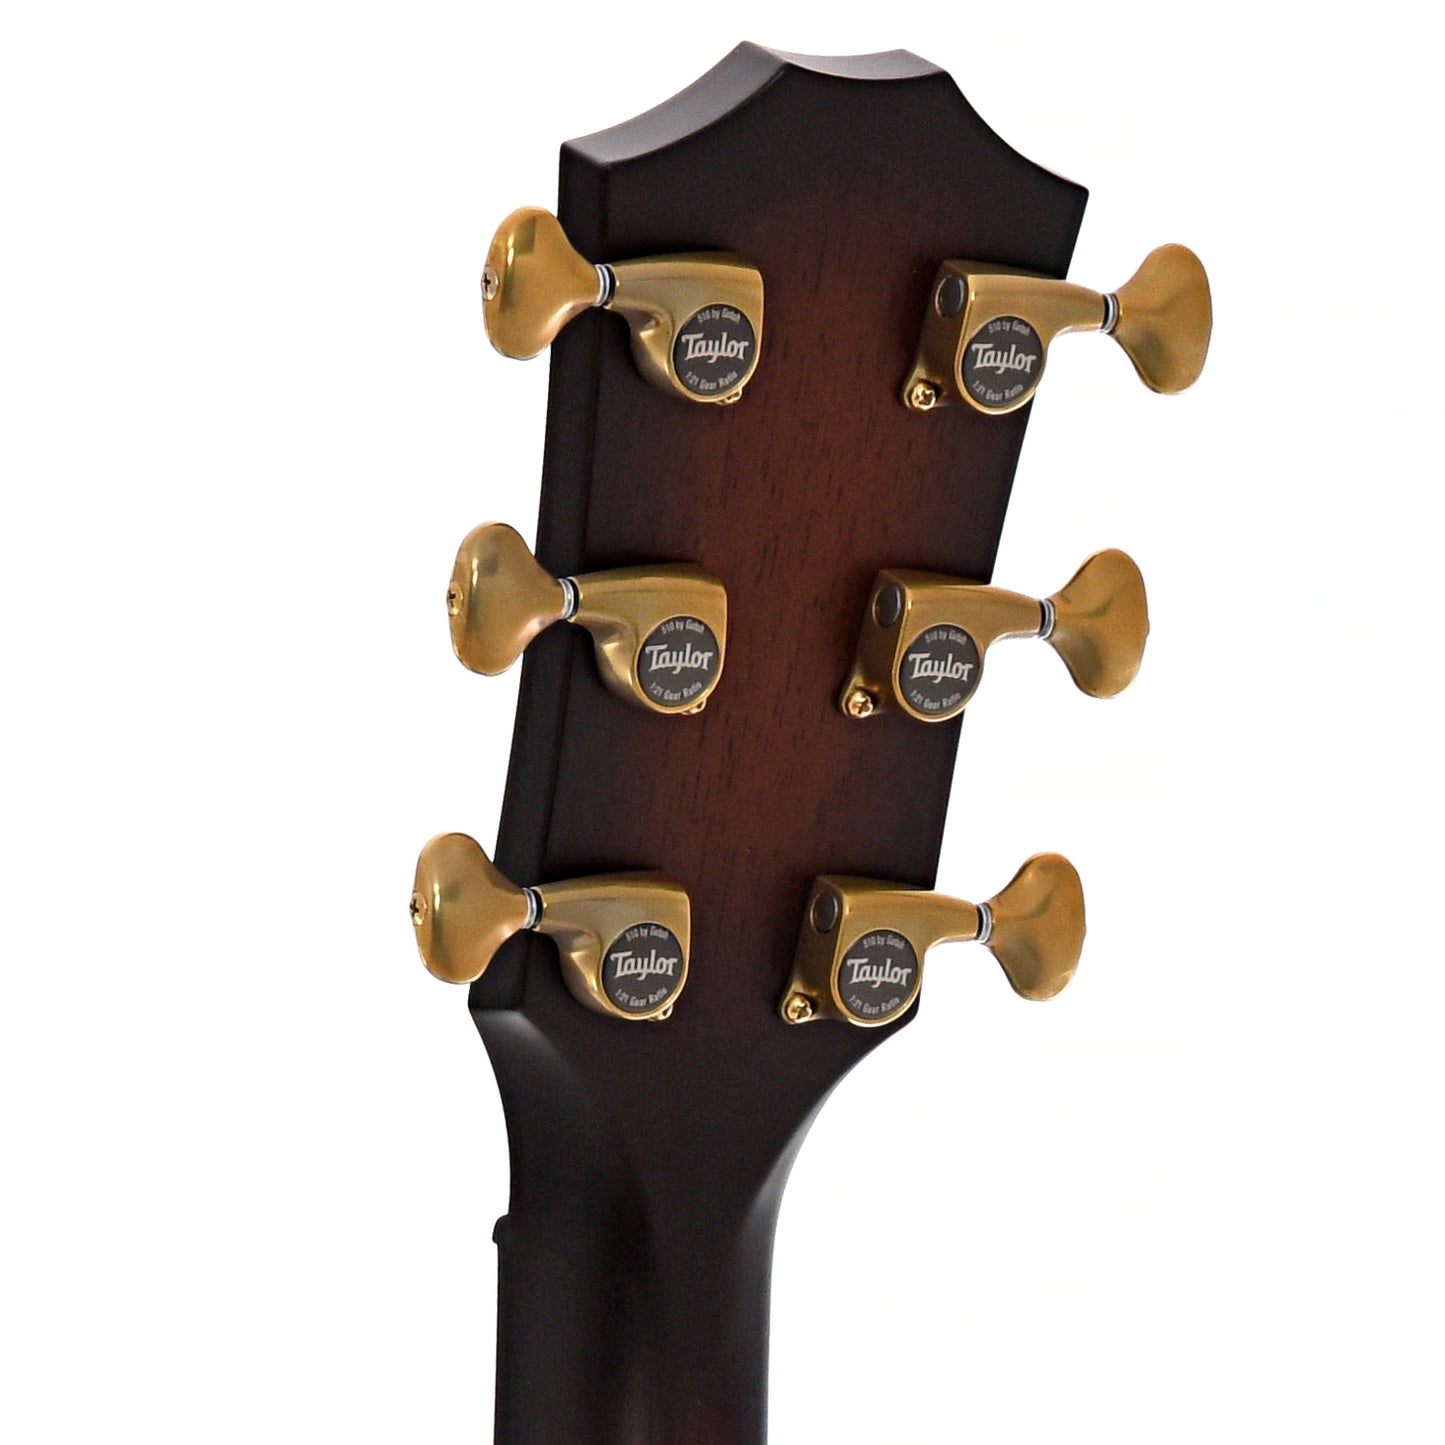 Back headstock of Taylor Builder's Edition 324ce Acoustic